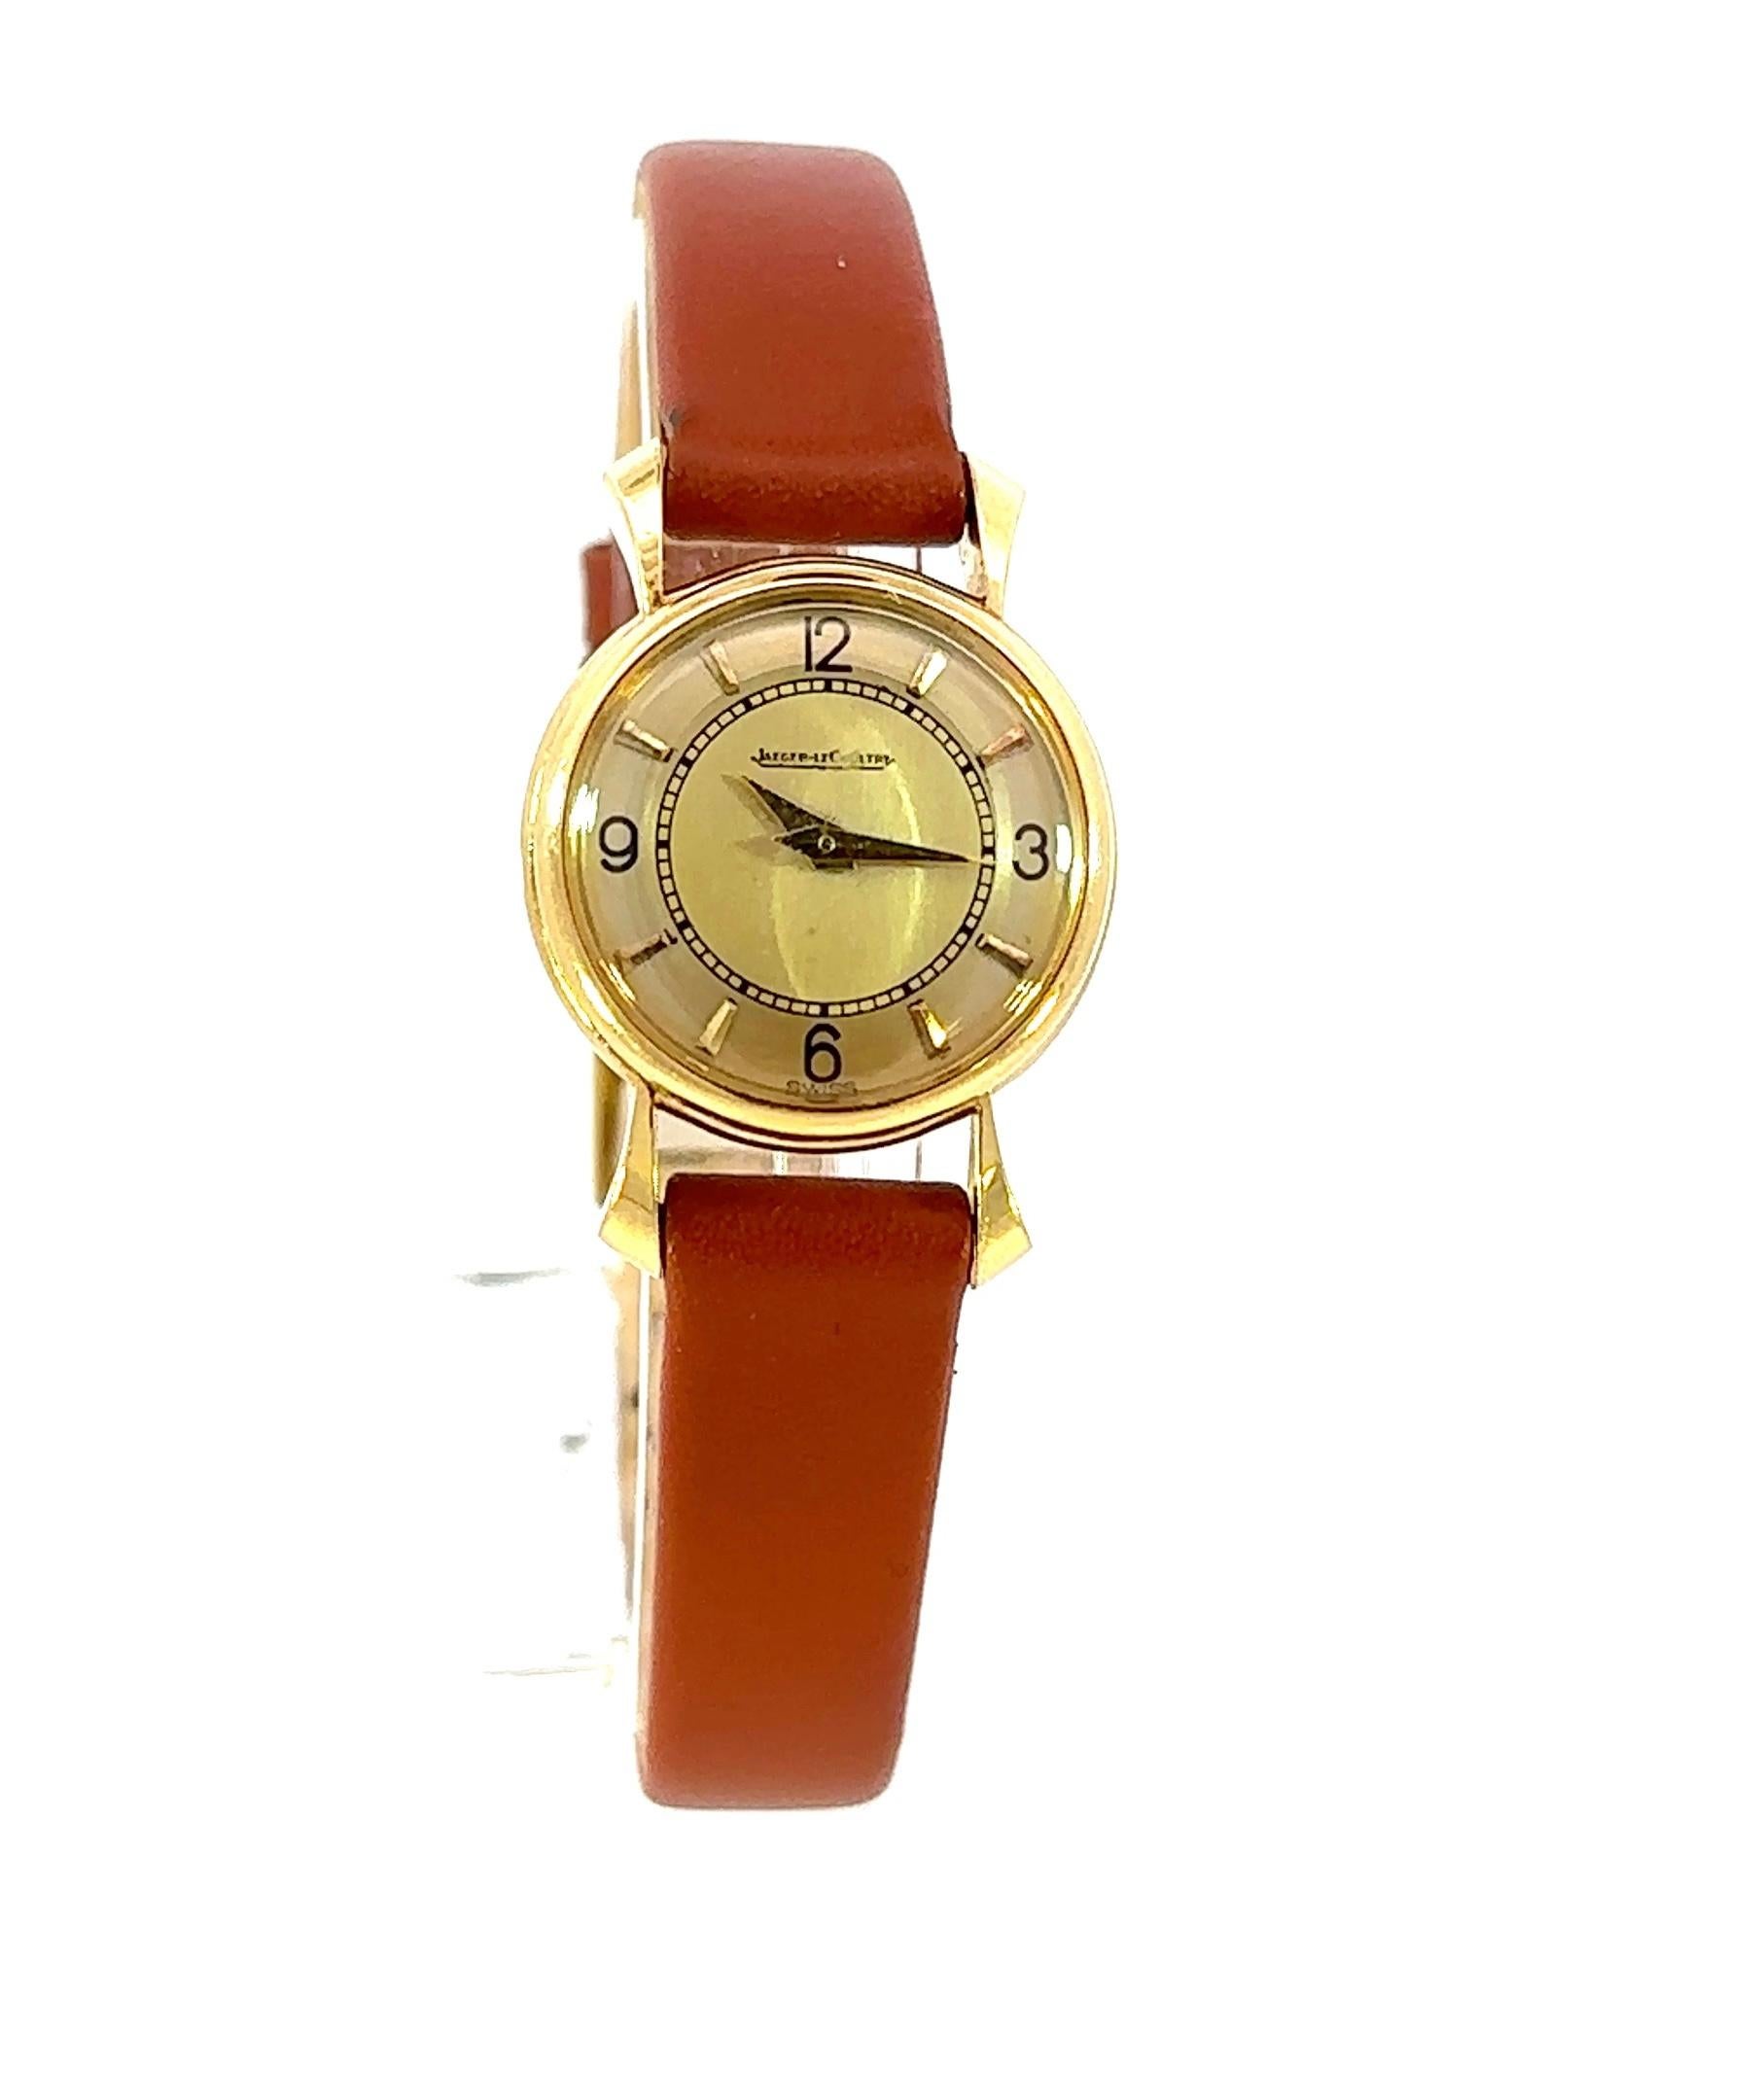 Vintage Ladies 18kt Yellow Gold Jaeger Le Coultre Back Winder Wrist Watch

Extremely rare Collectors watch

Movement: Mechanical Manual Winding Back winder

Case: 18kt Yellow gold diameter 20.5mm, thickness 6.6mm

Dial: Golden dial with gold indexes